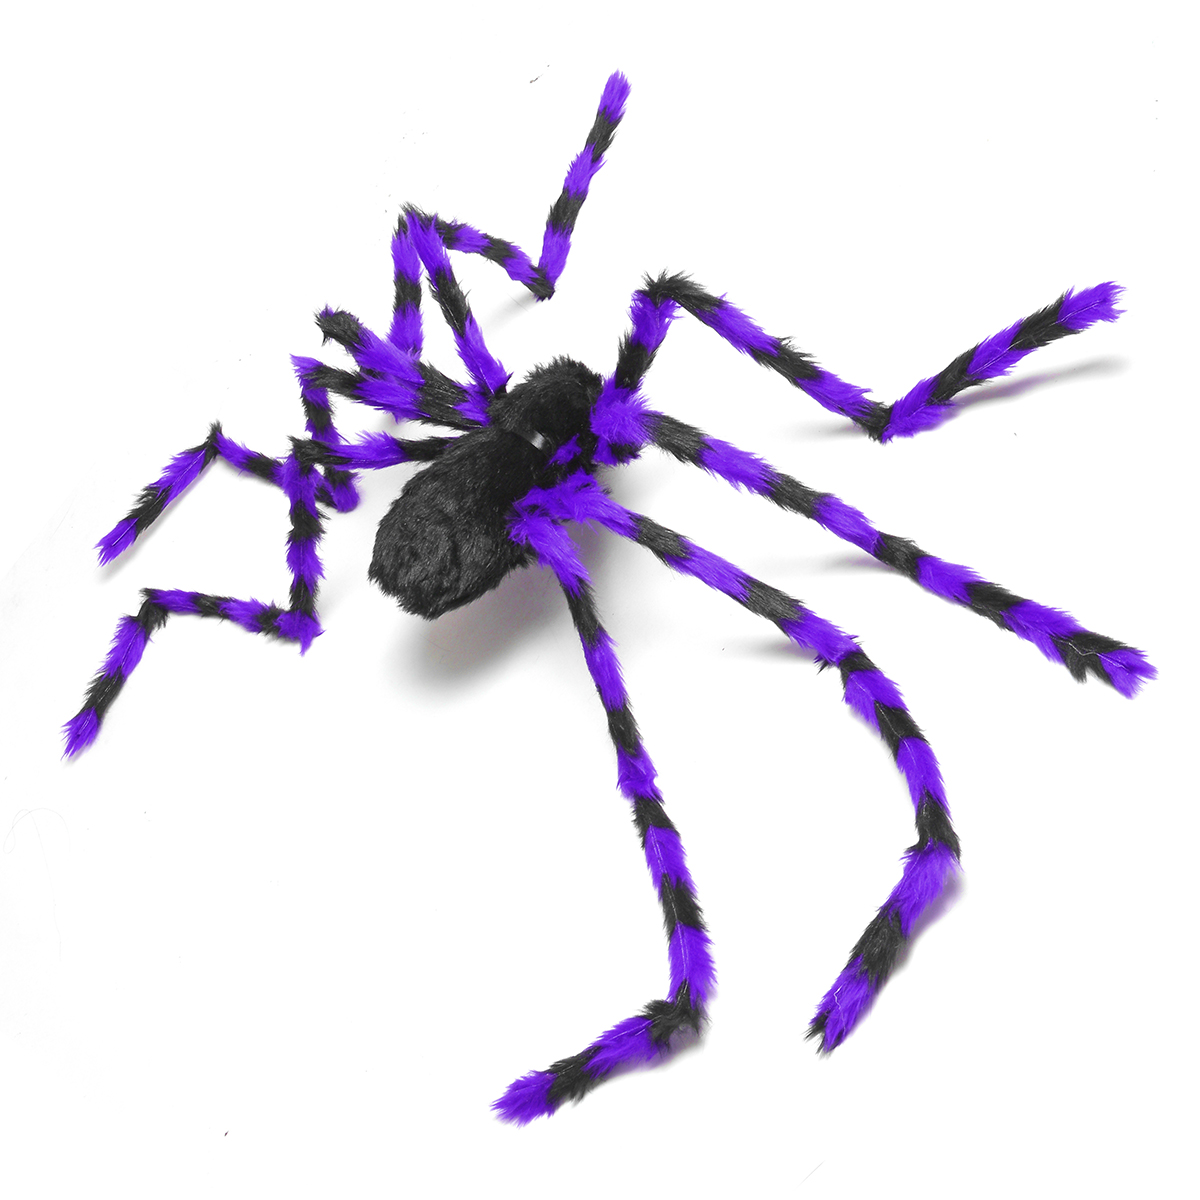 150cm-Horrible-Giant-Furry-Spider-Decorations-Halloween-Haunted-House-Prop-Gift-1589939-8